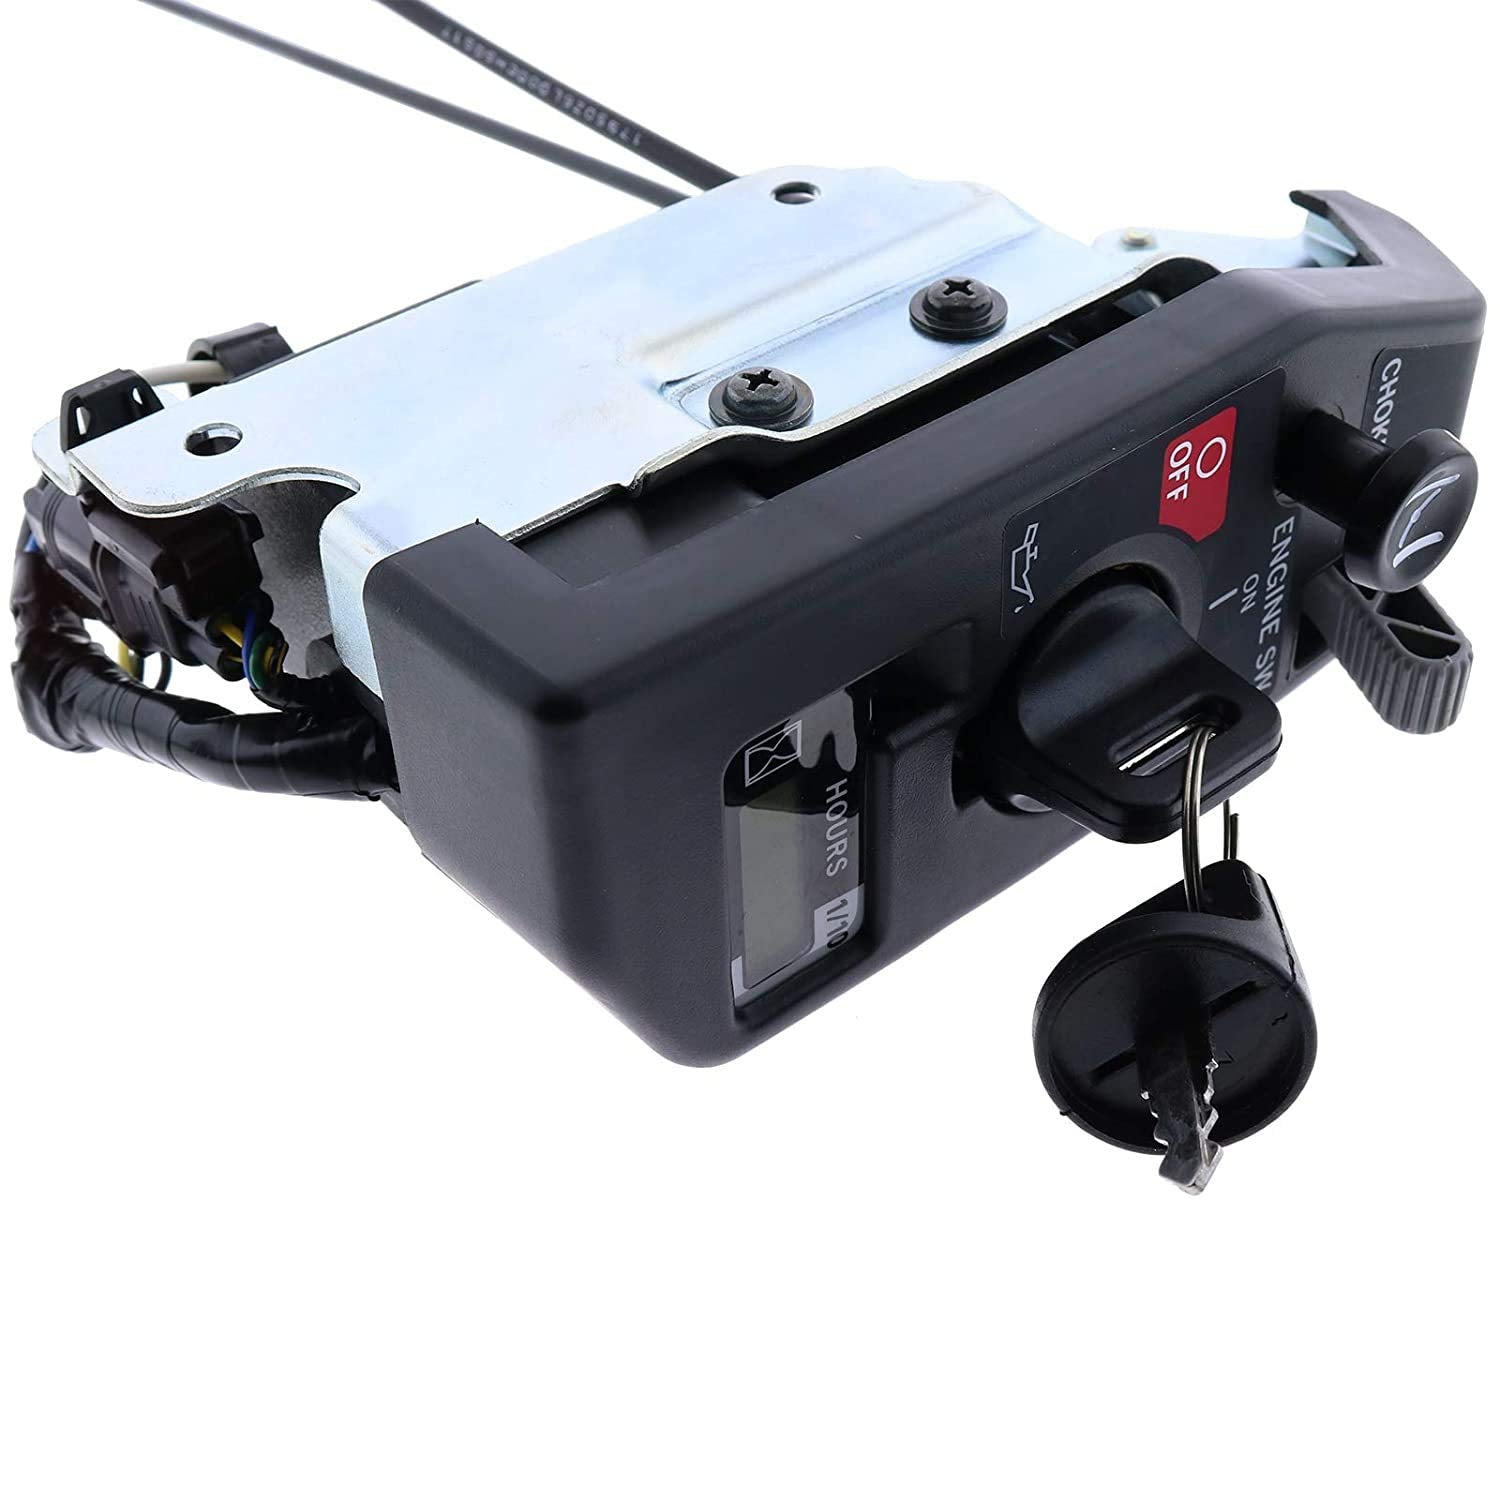 Ignition Starter Switch Control Box Assy with 2 Keys and 2 Throttle Cables for Honda GX630 GX690 10KW Double Cylinder Gasoline Generator - KUDUPARTS